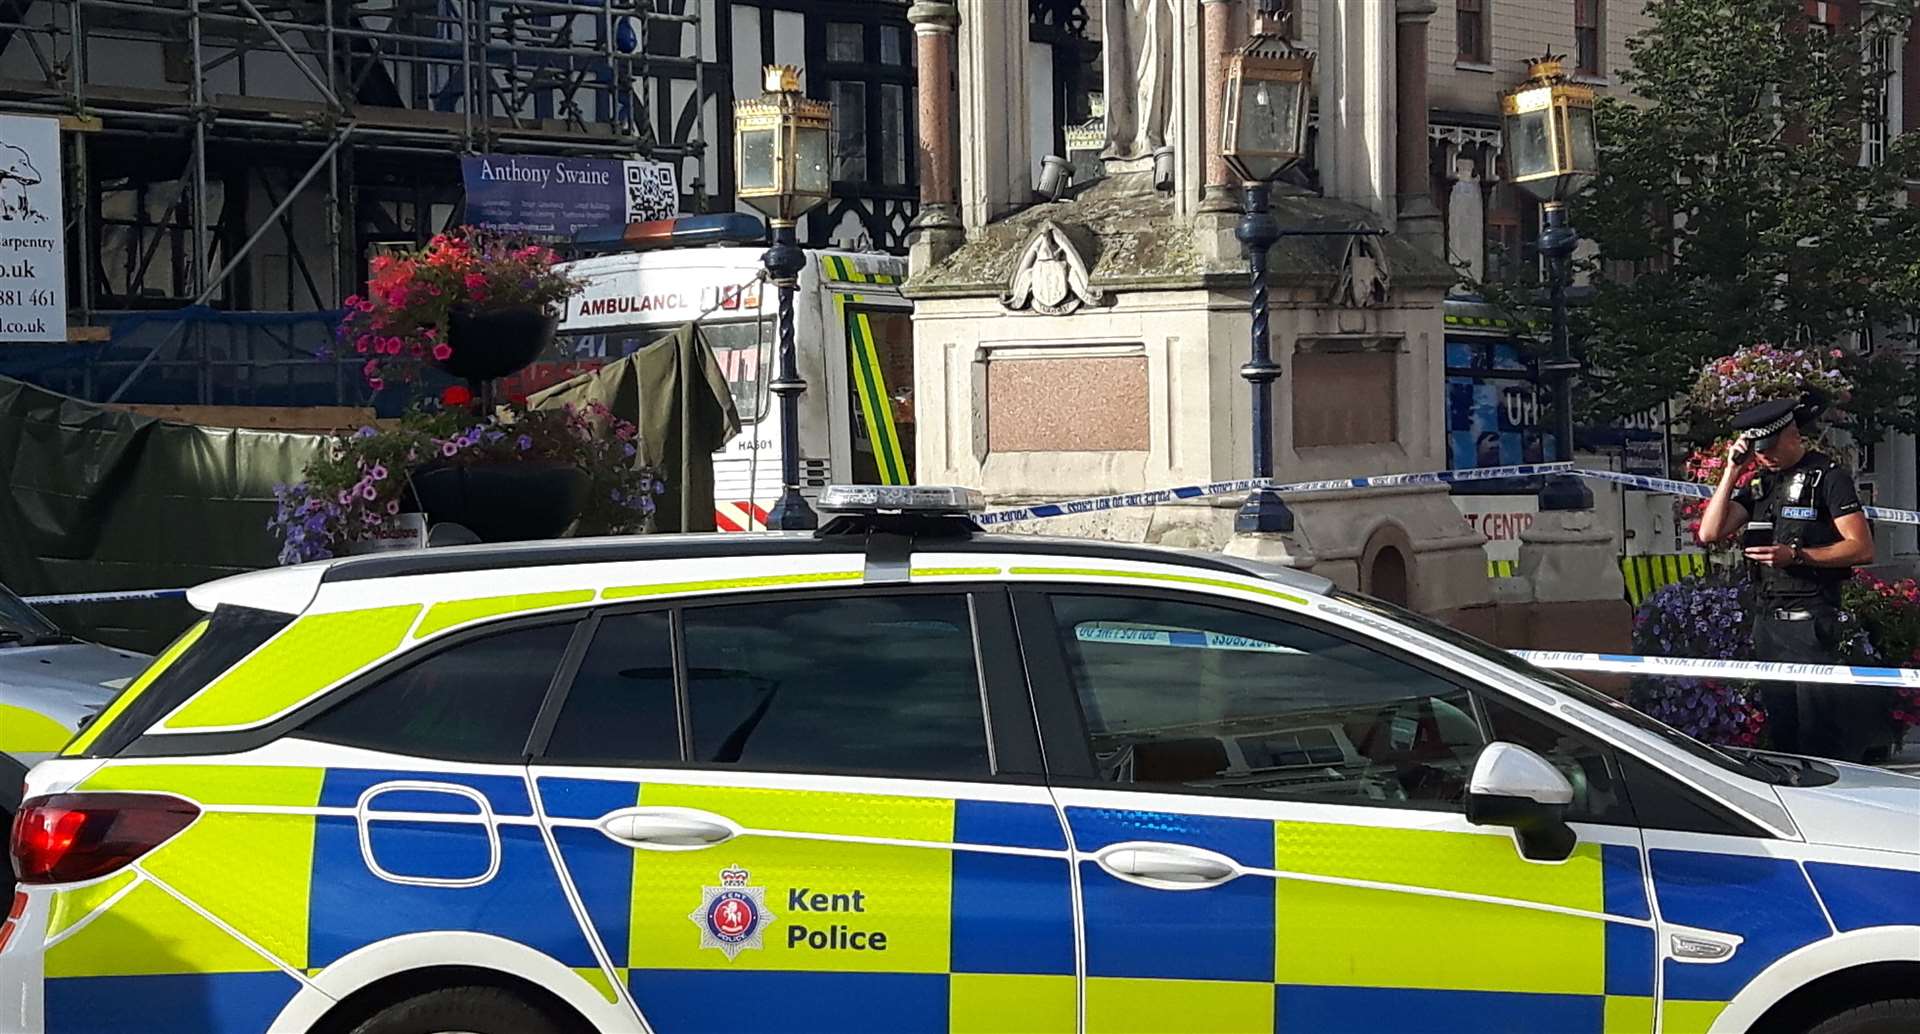 Police at the scene in Maidstone town centre